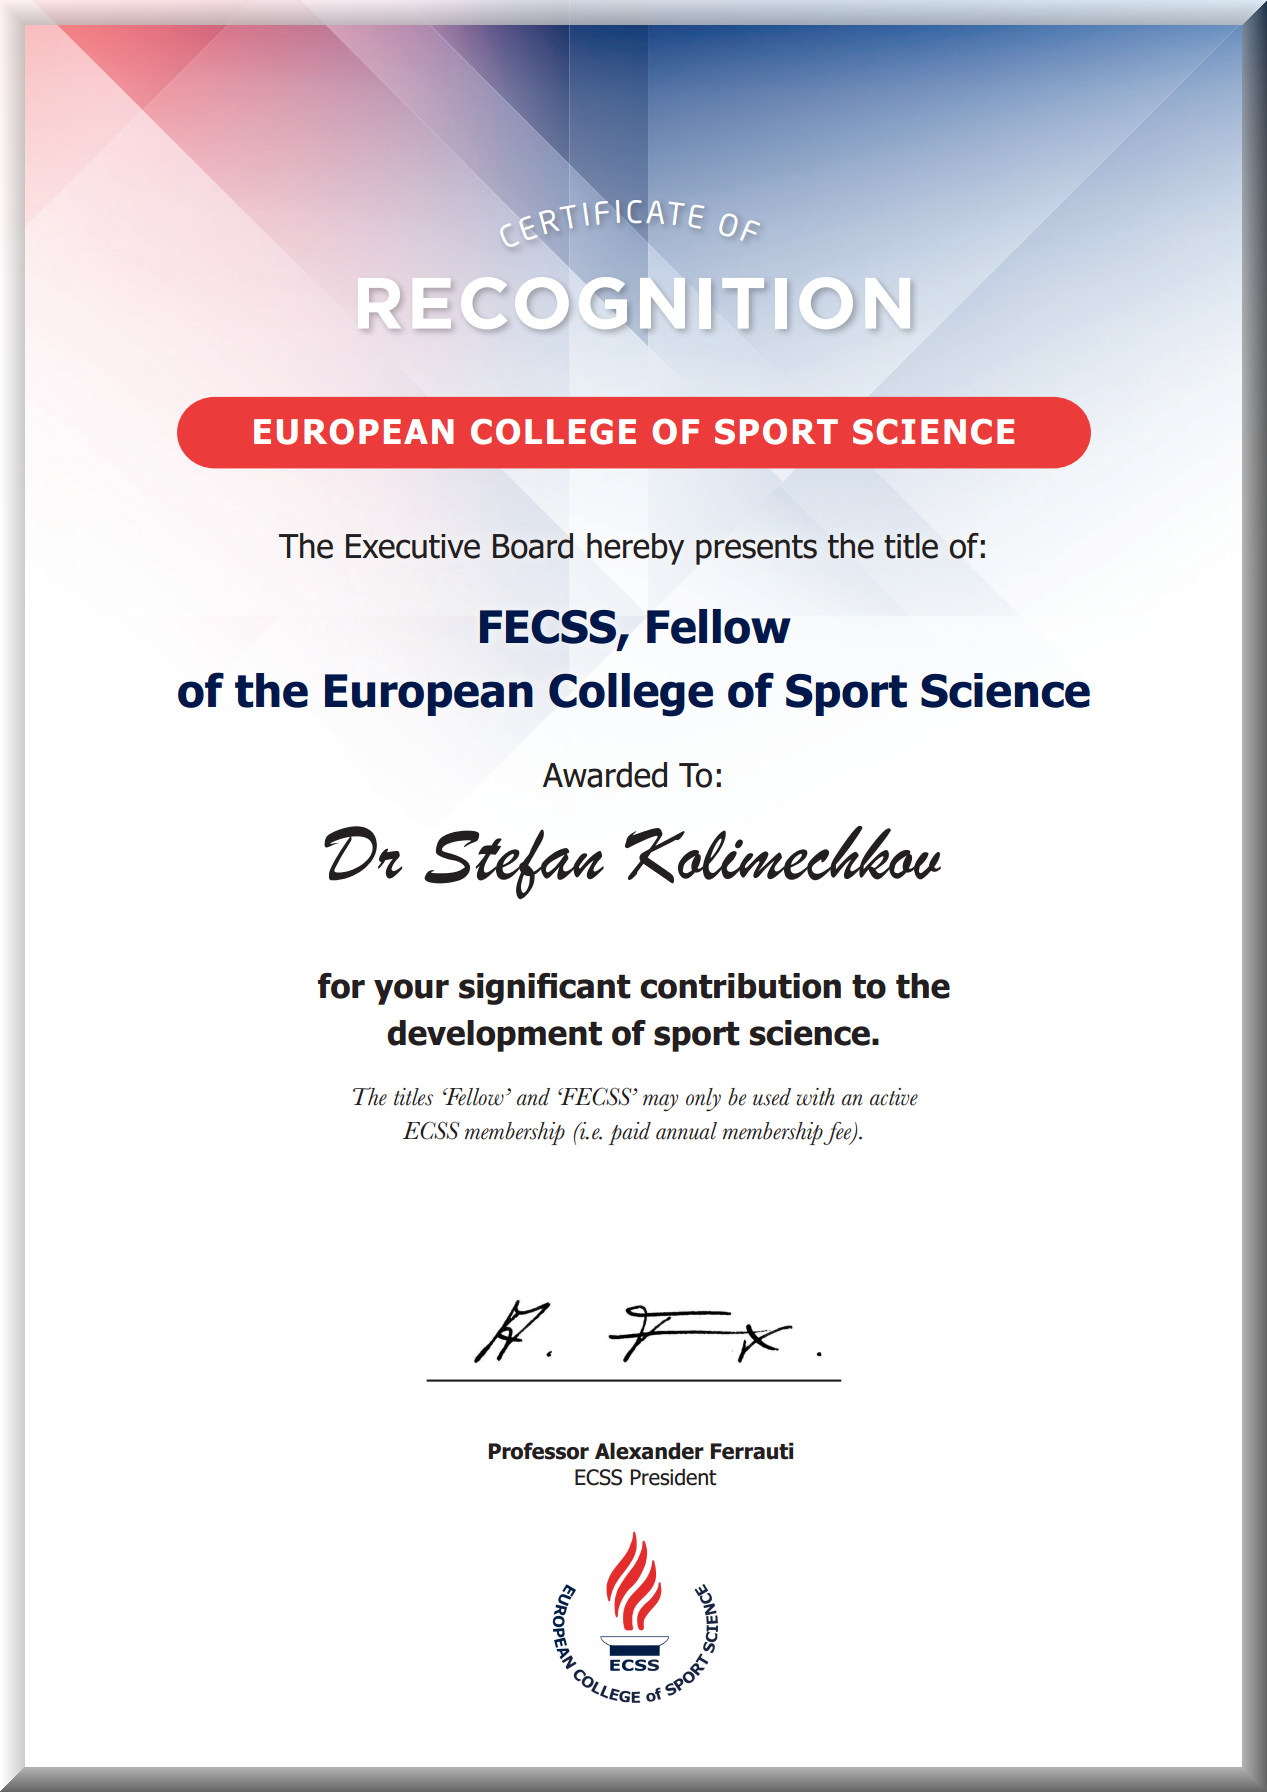 Dr Kolimechkov is a Fellow of the European College of Sport Science